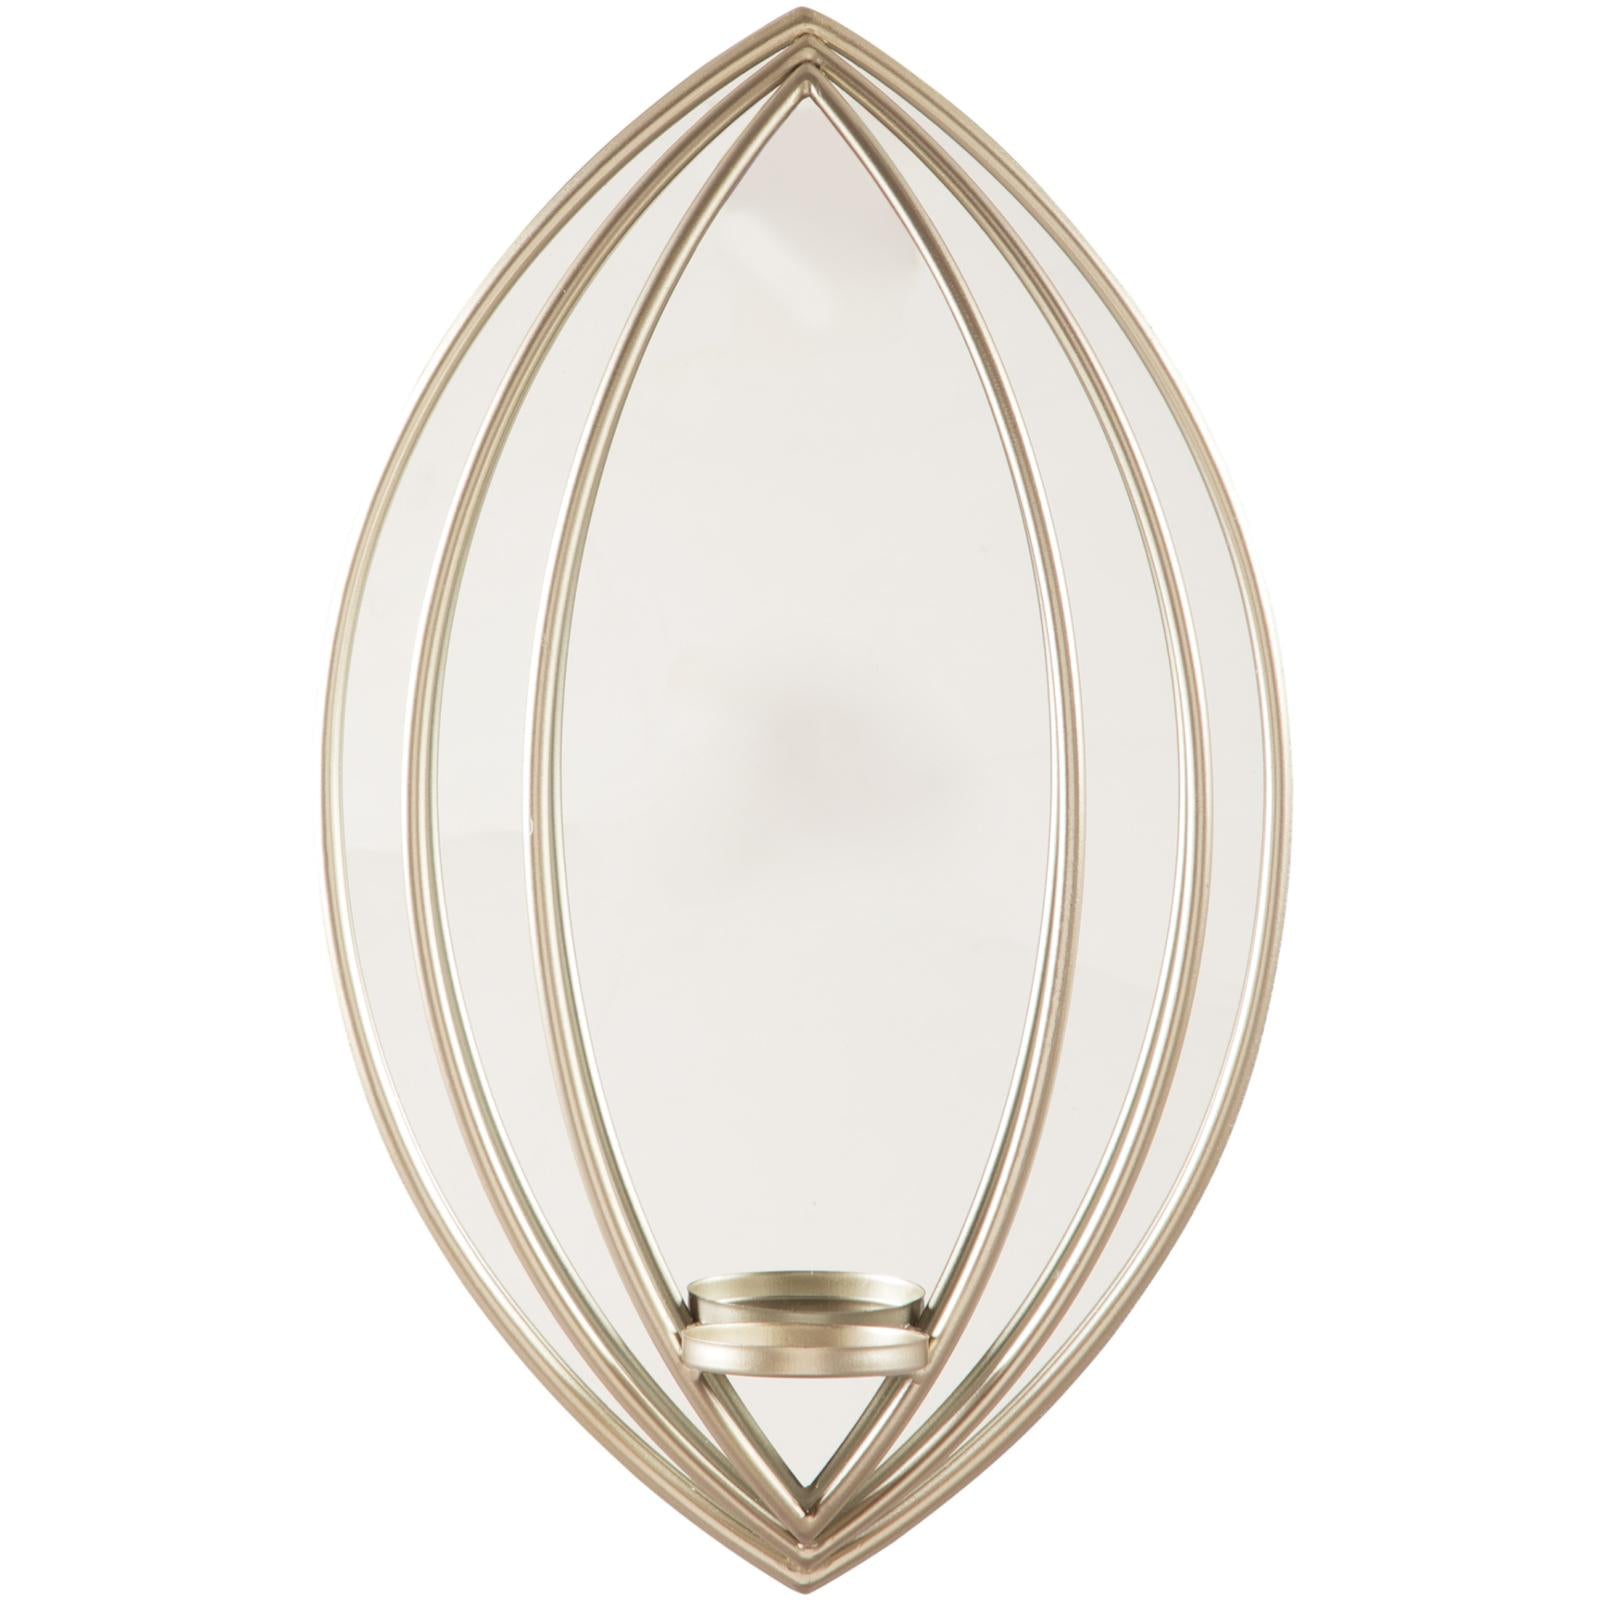 Donnica Wall Sconce, New Upload, Ashley Furniture - Adams Furniture